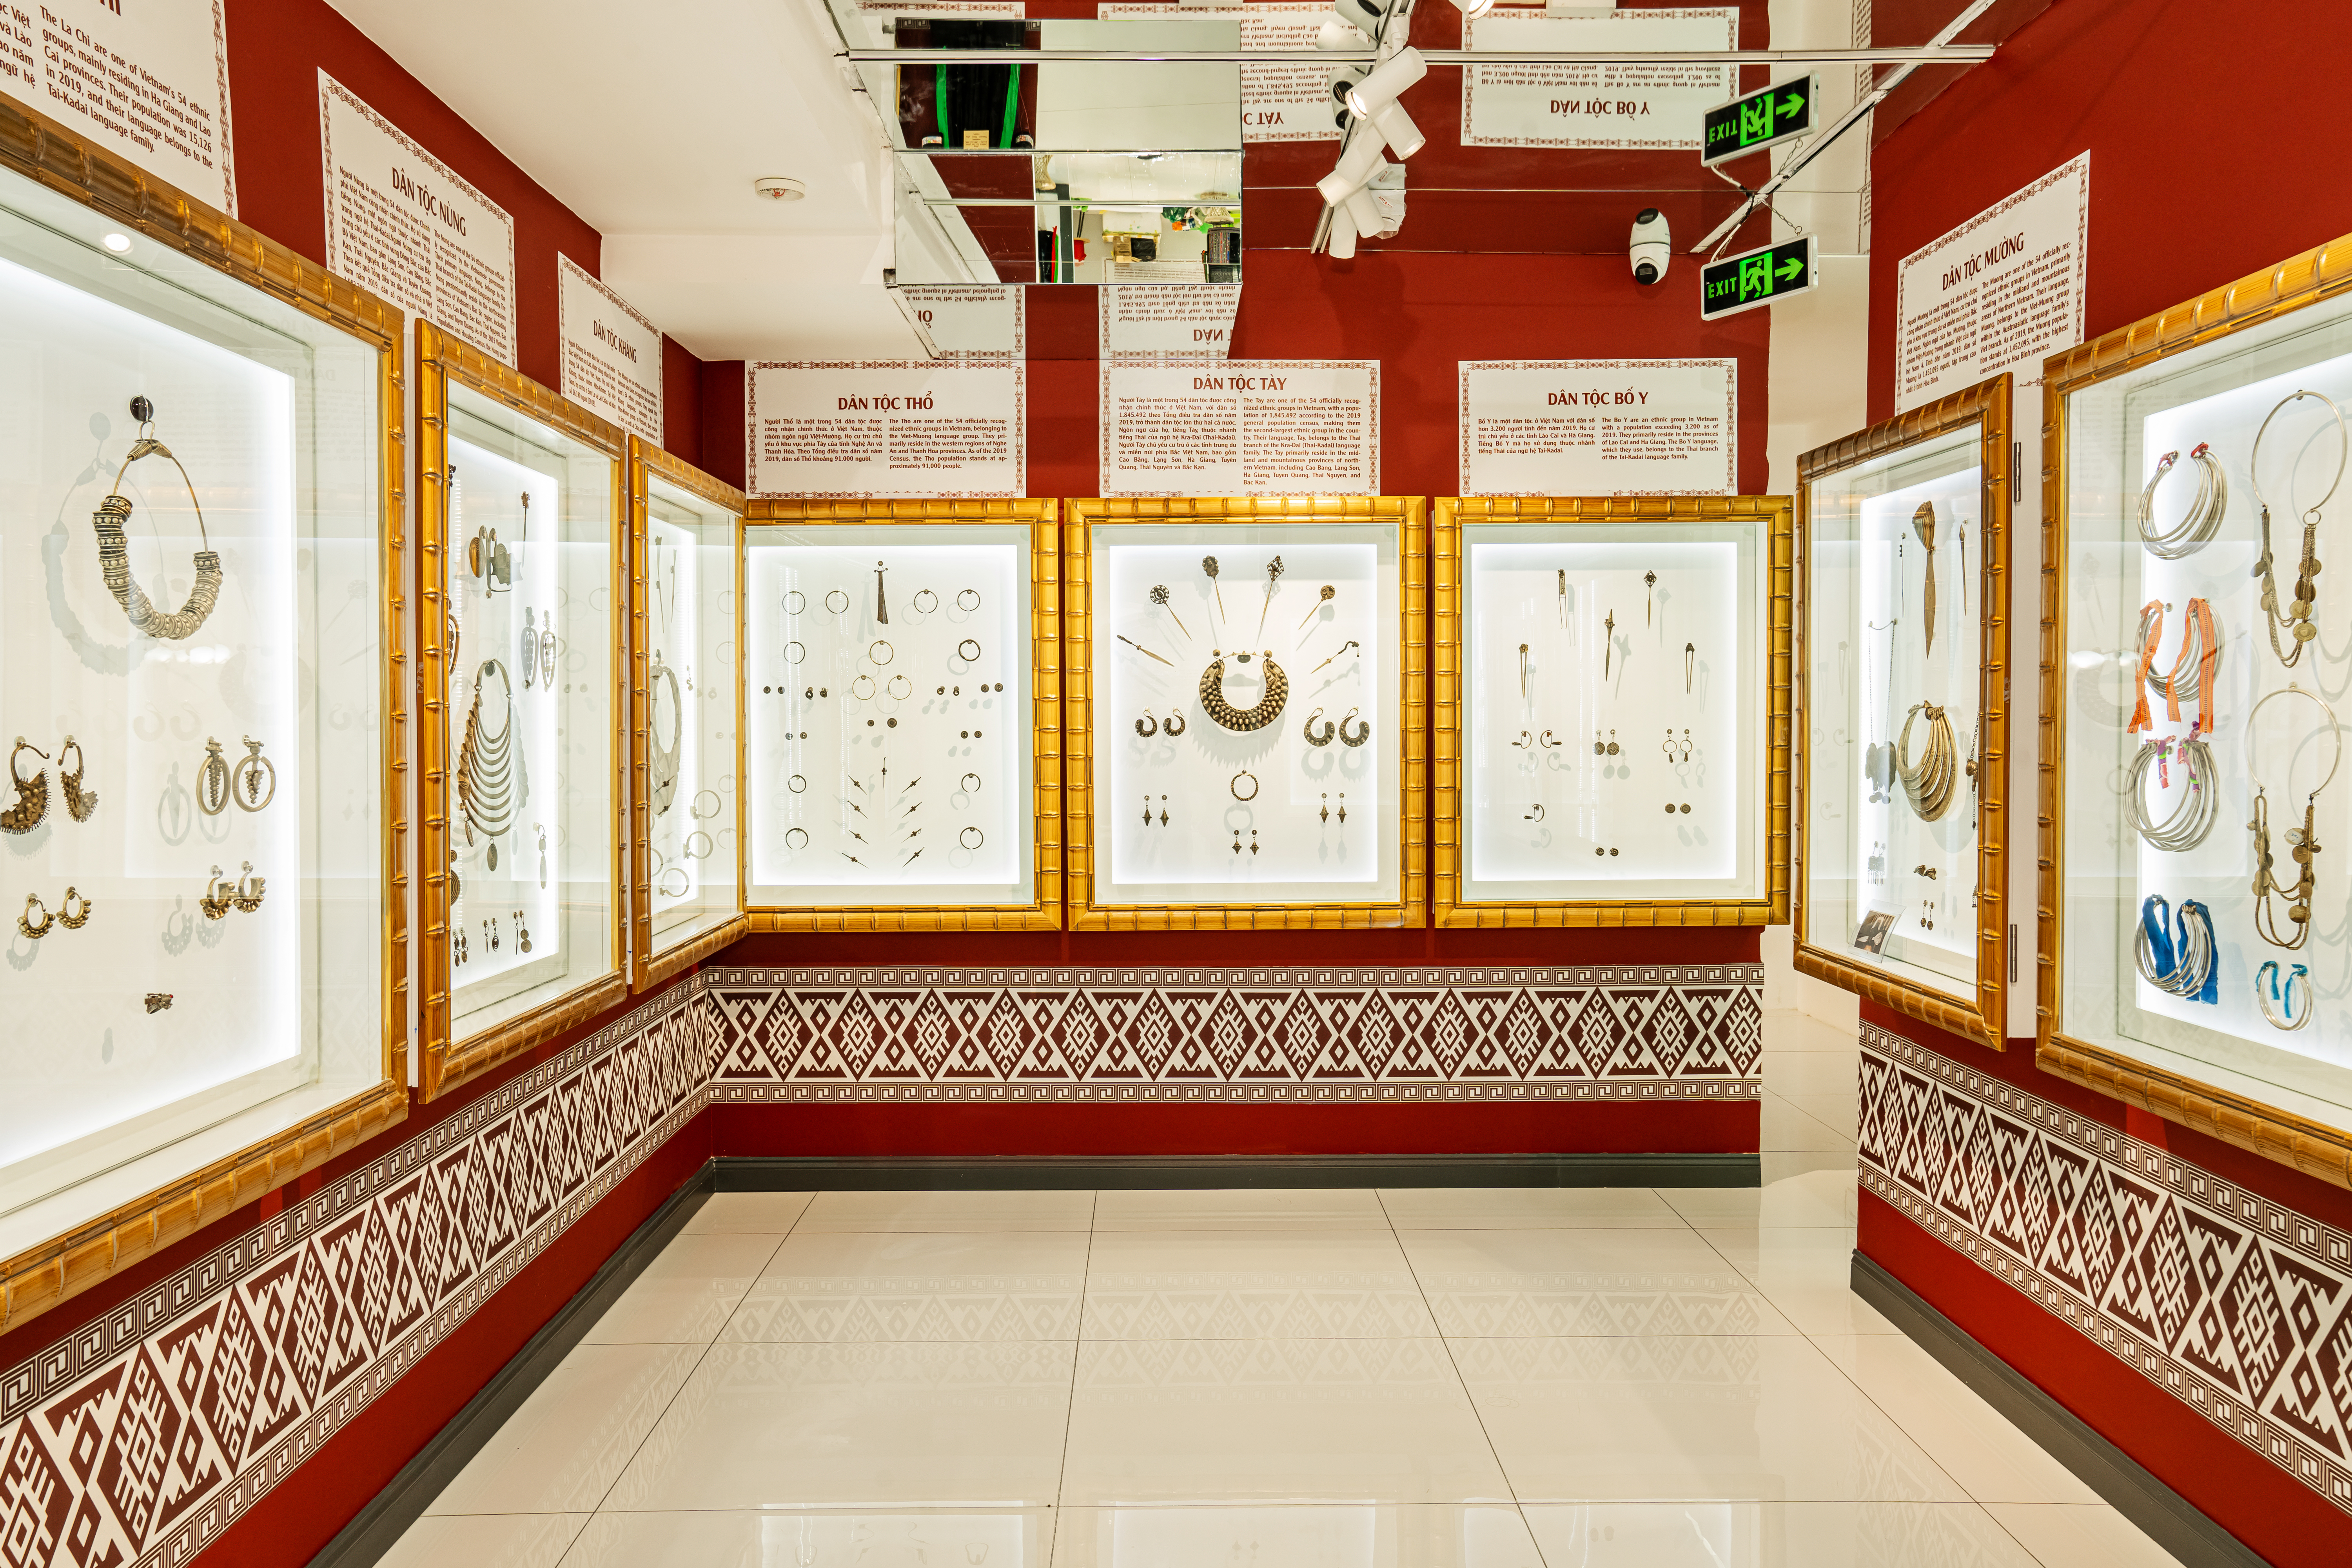 Jewelries from the Vietnamese ethnic groups are displayed at the Vietnam's 54 Ethnic Groups Jewelry Museum in District 1, Ho Chi Minh City. Photo: Supplied